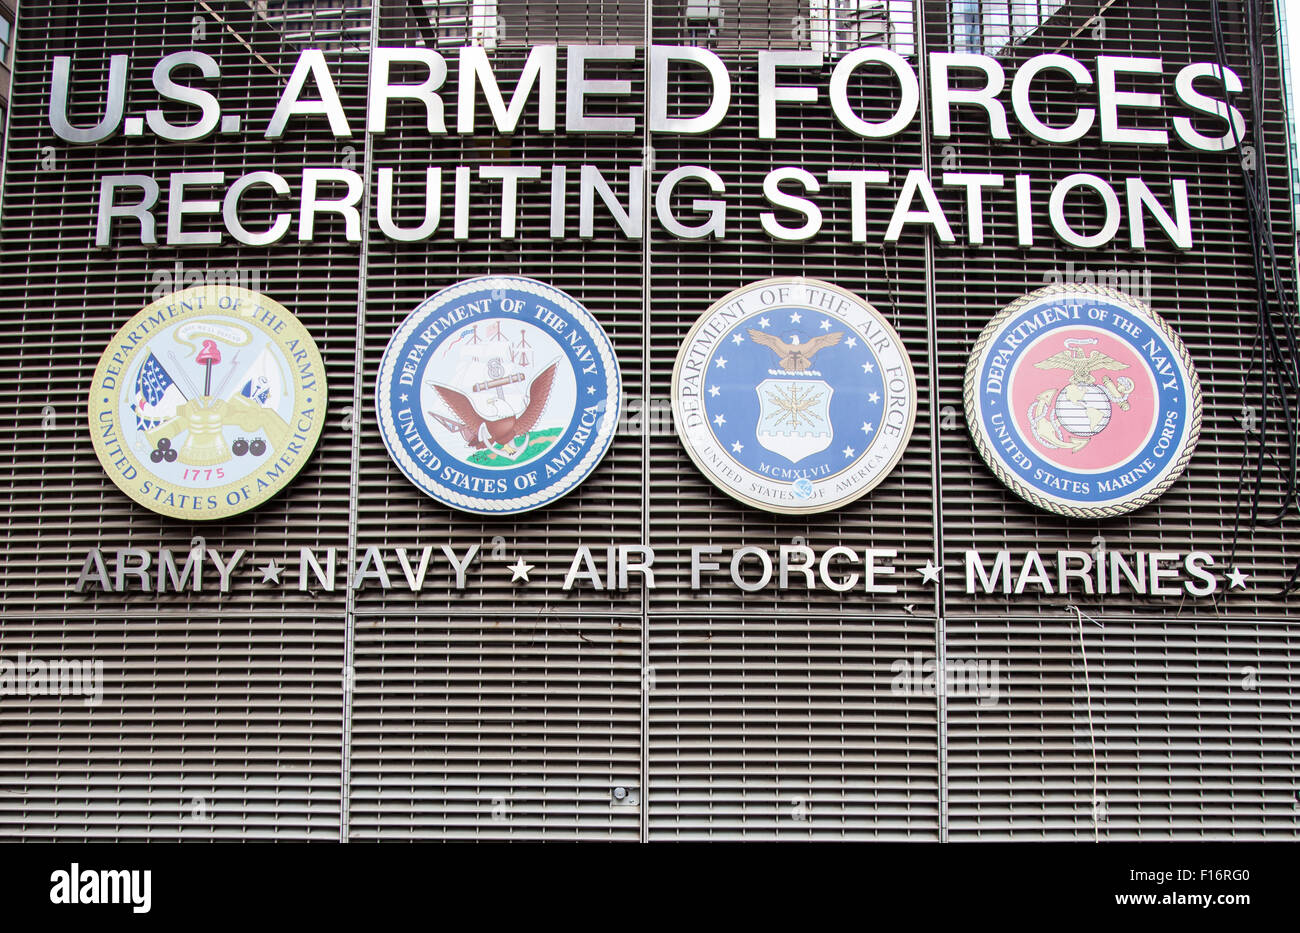 US armed forces recruiting station on Times Square New York City Stock Photo